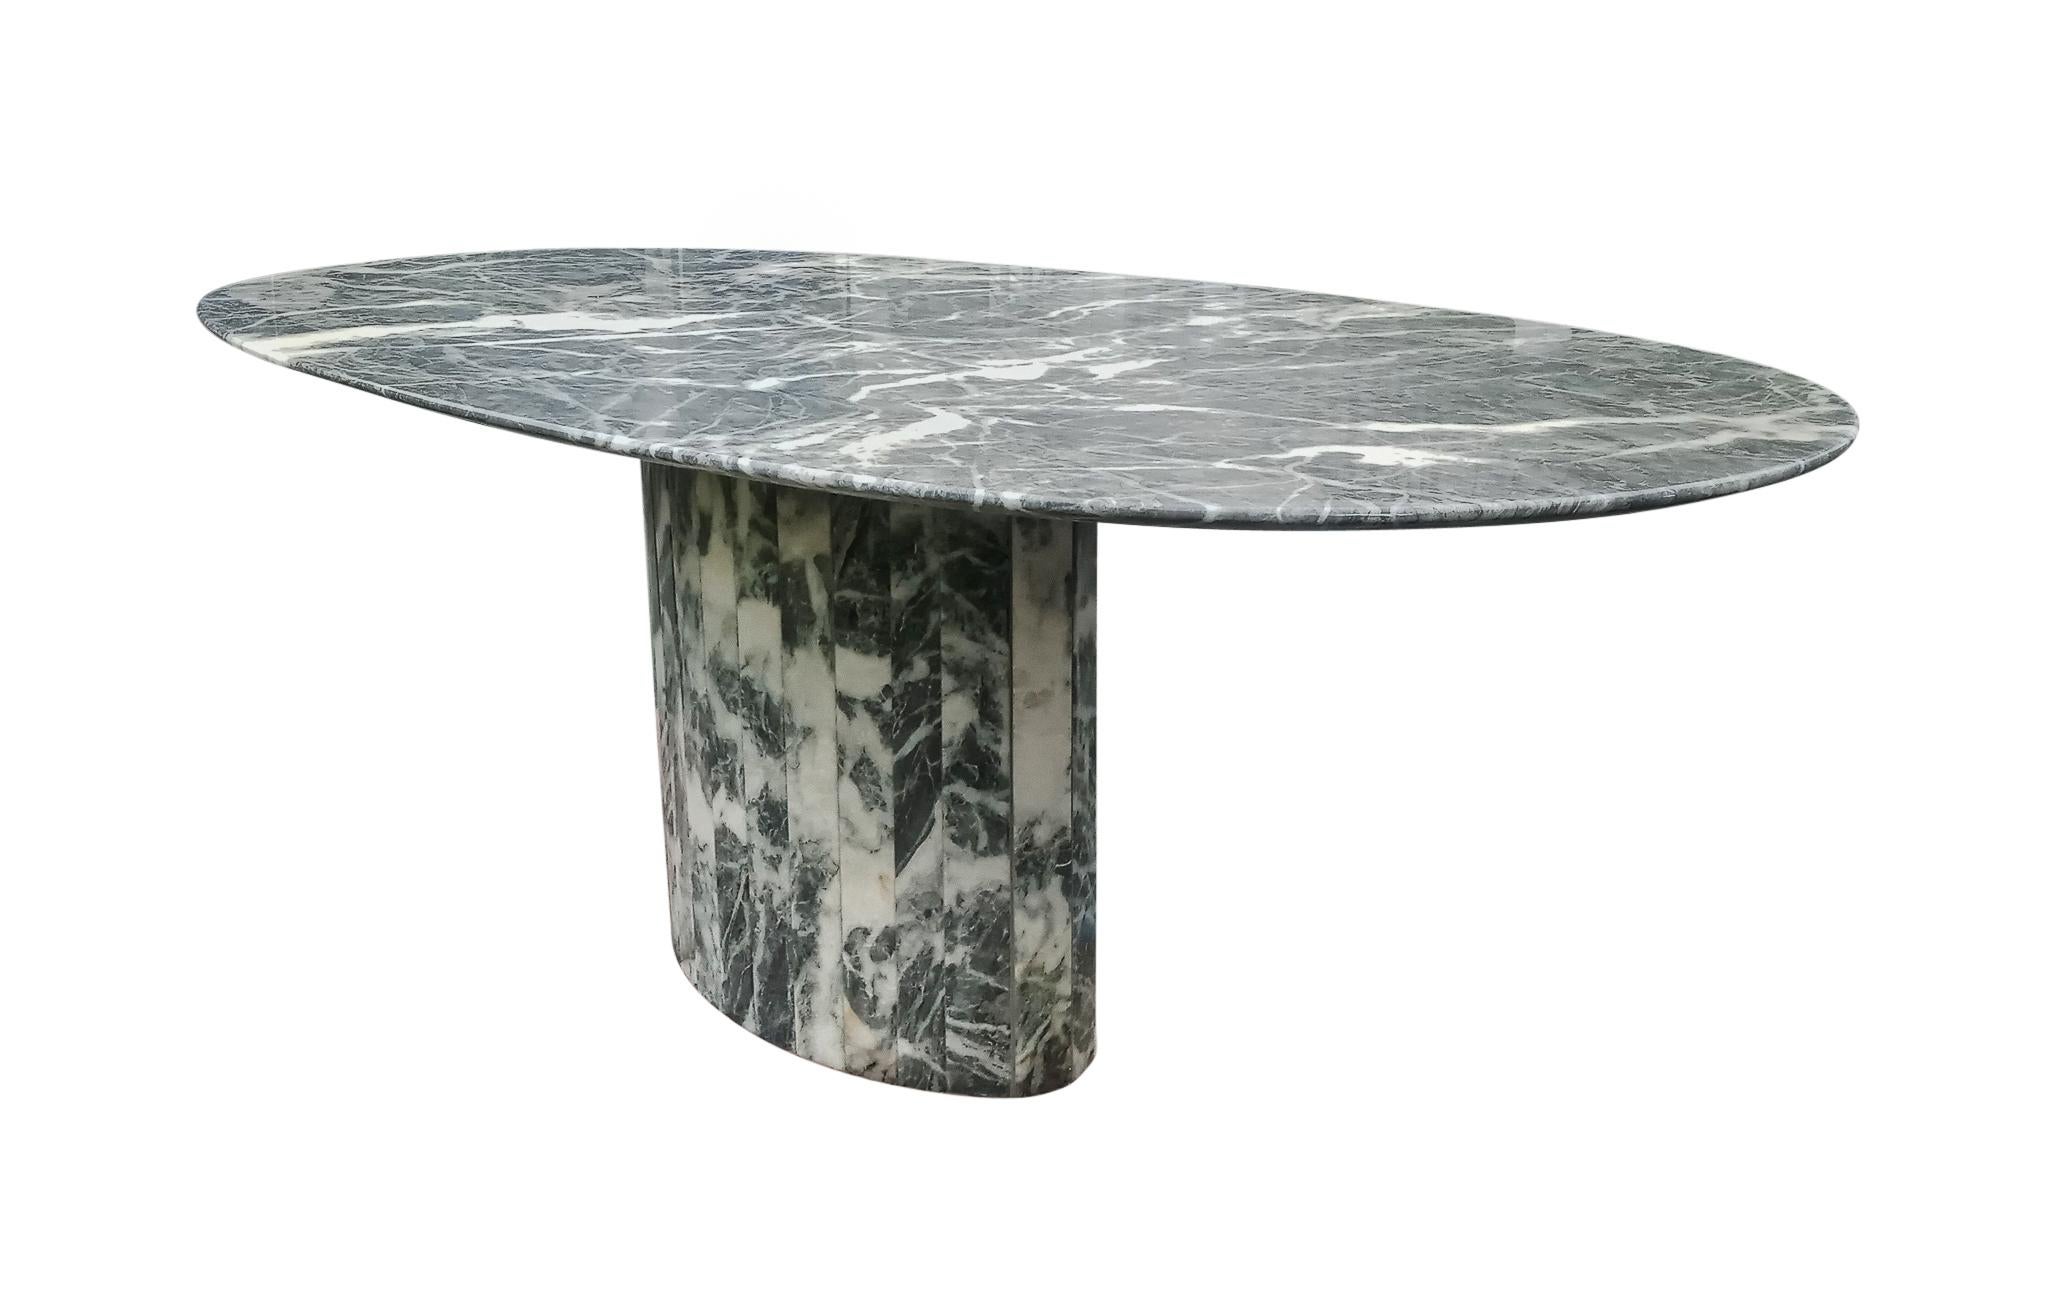 Late 20th Century Superb 1980s Italian Gray & White Exotic Marble Table Oval Top Segment Base